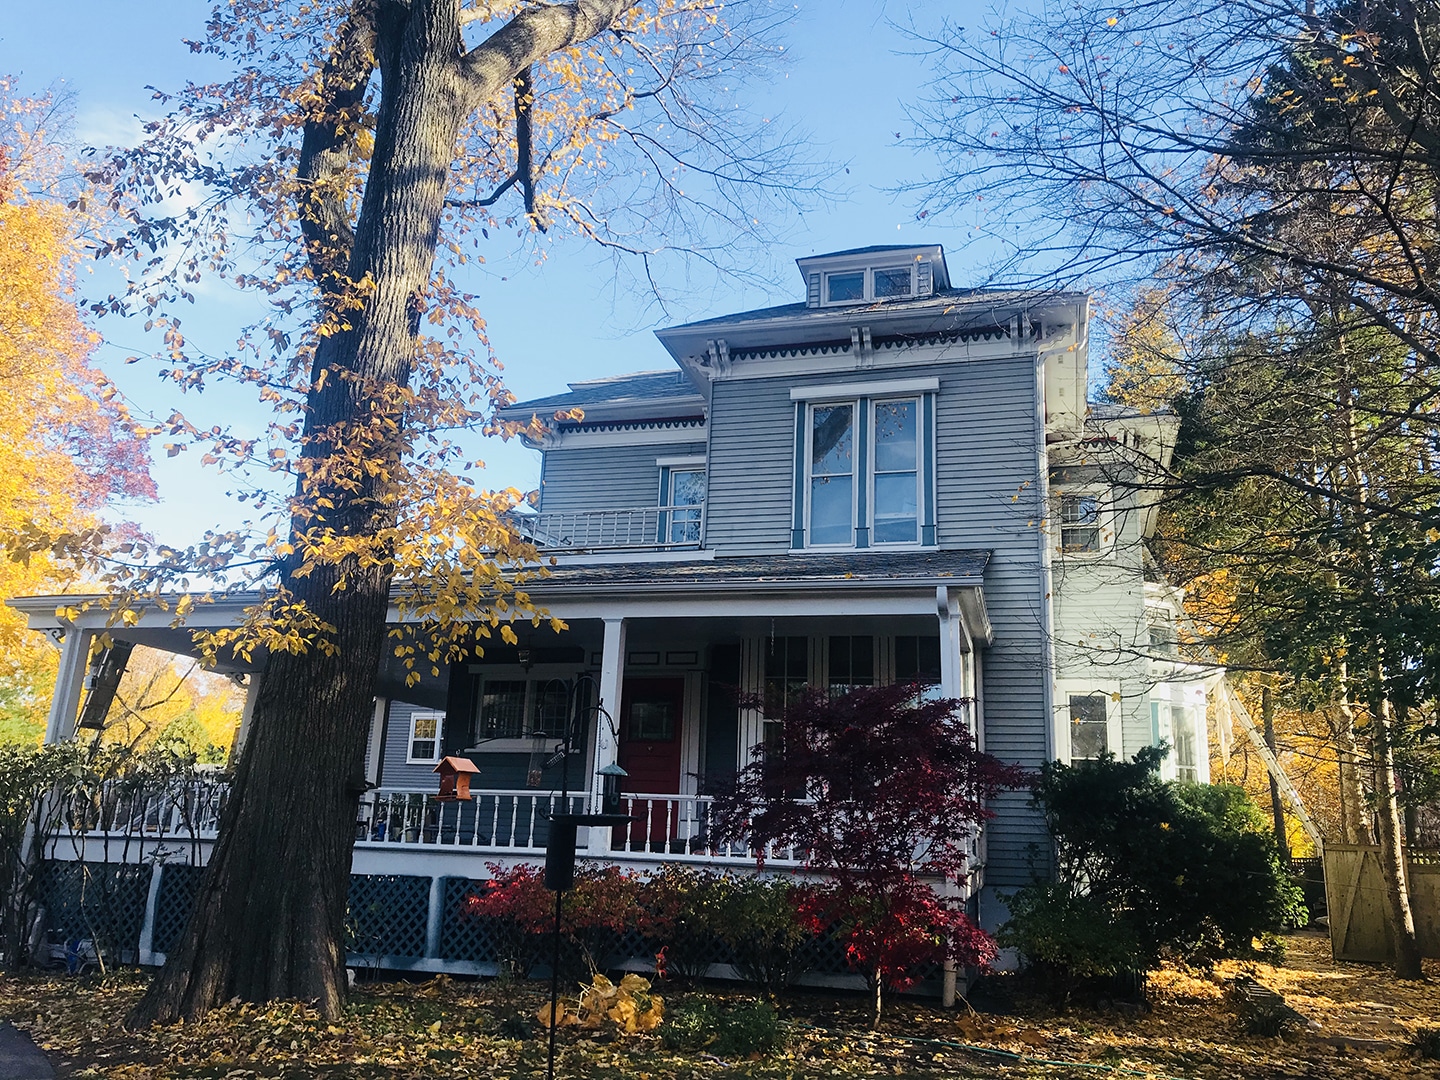 Front picture of a house in autumn